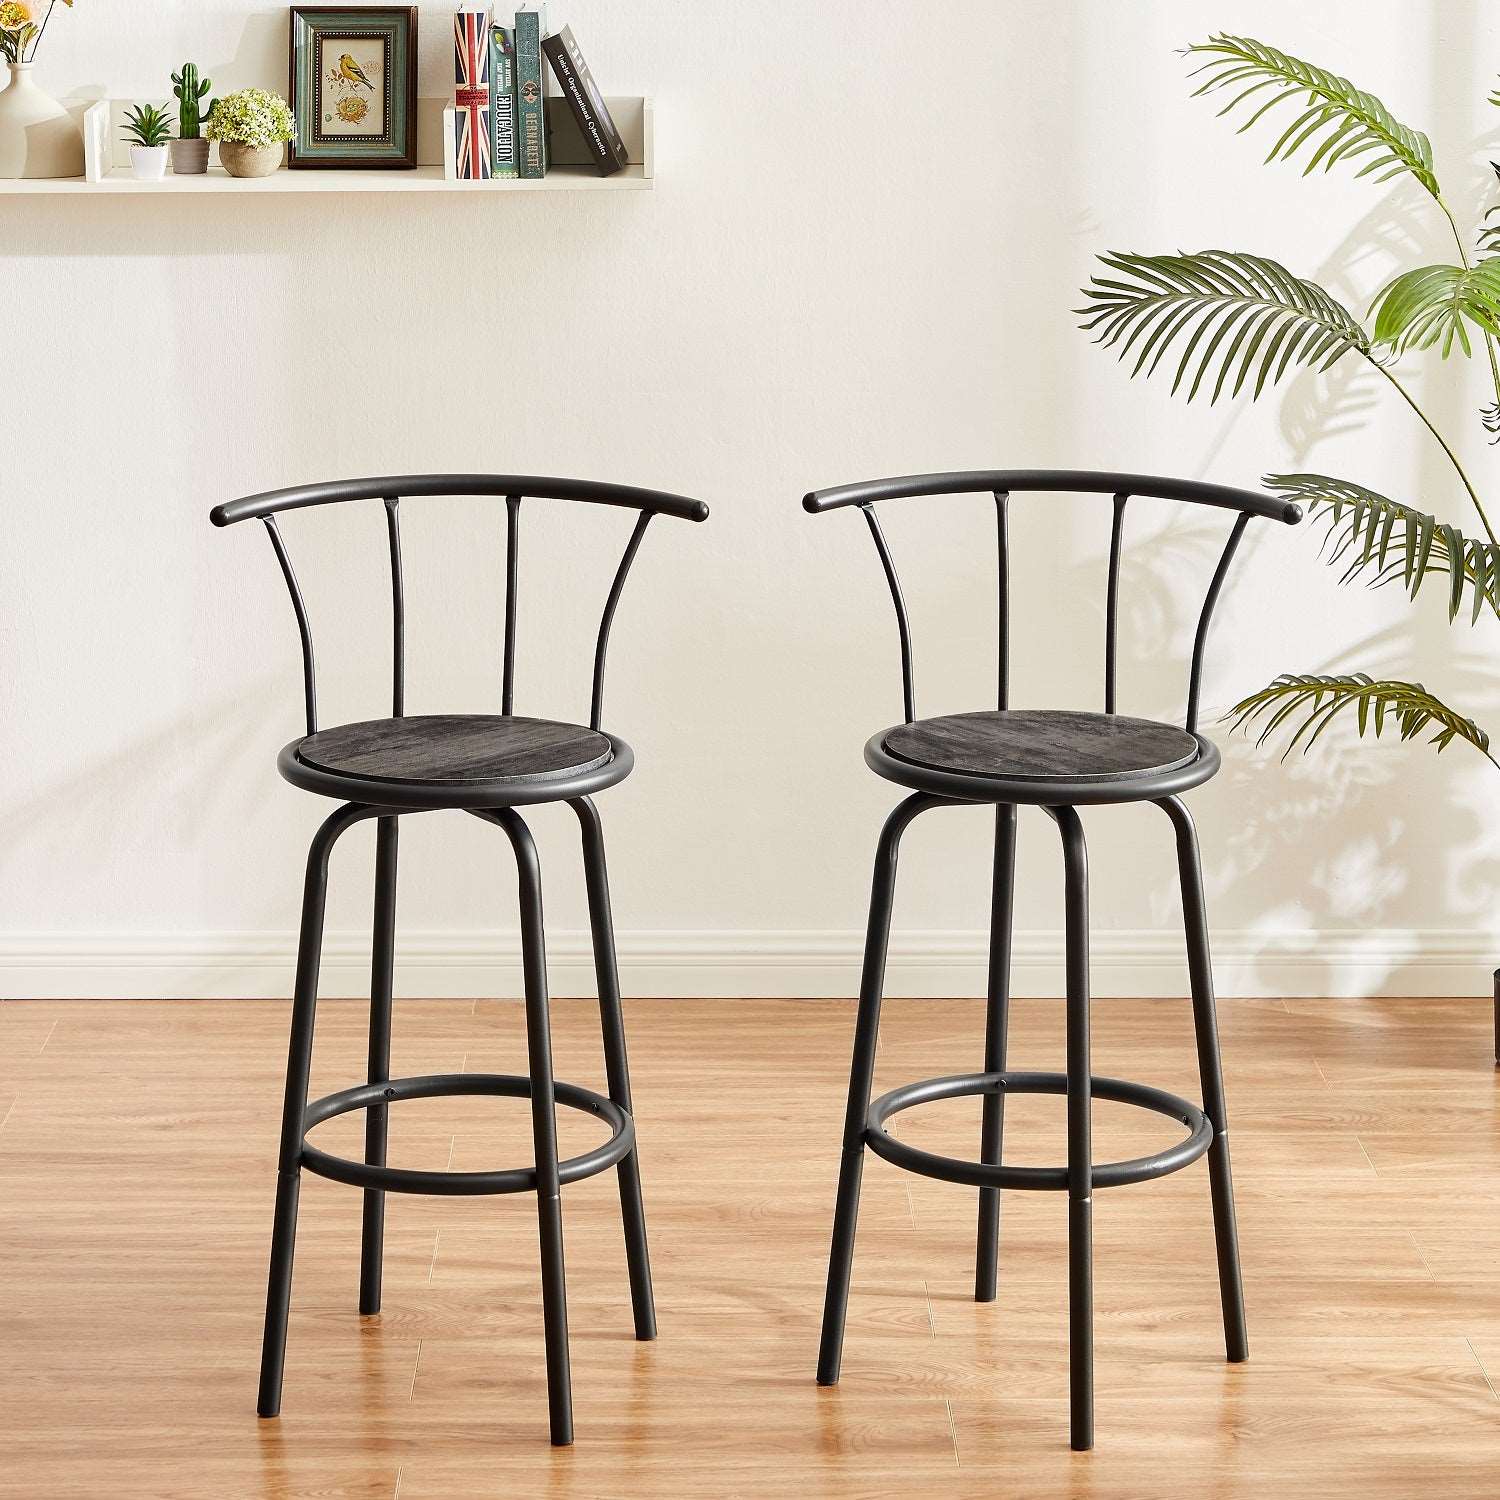 VECELO 27.3 Inch Bar Stools Set of 2 with Back Metal Barstools/Industrial Steel Frame for Kitchen